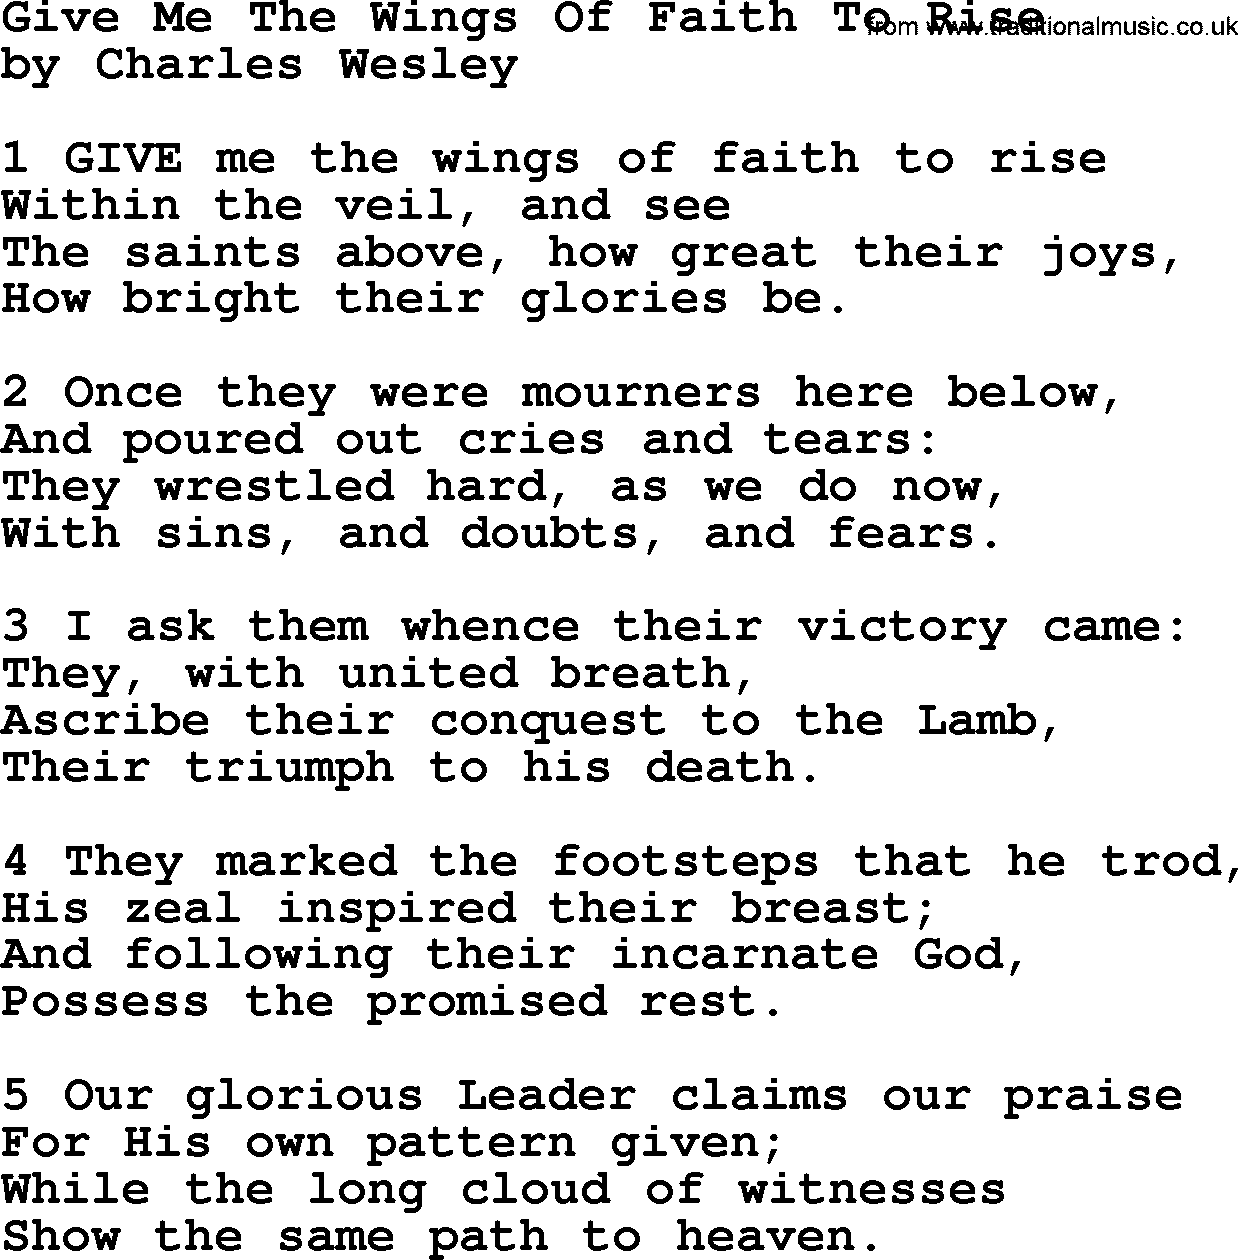 Charles Wesley hymn: Give Me The Wings Of Faith To Rise, lyrics